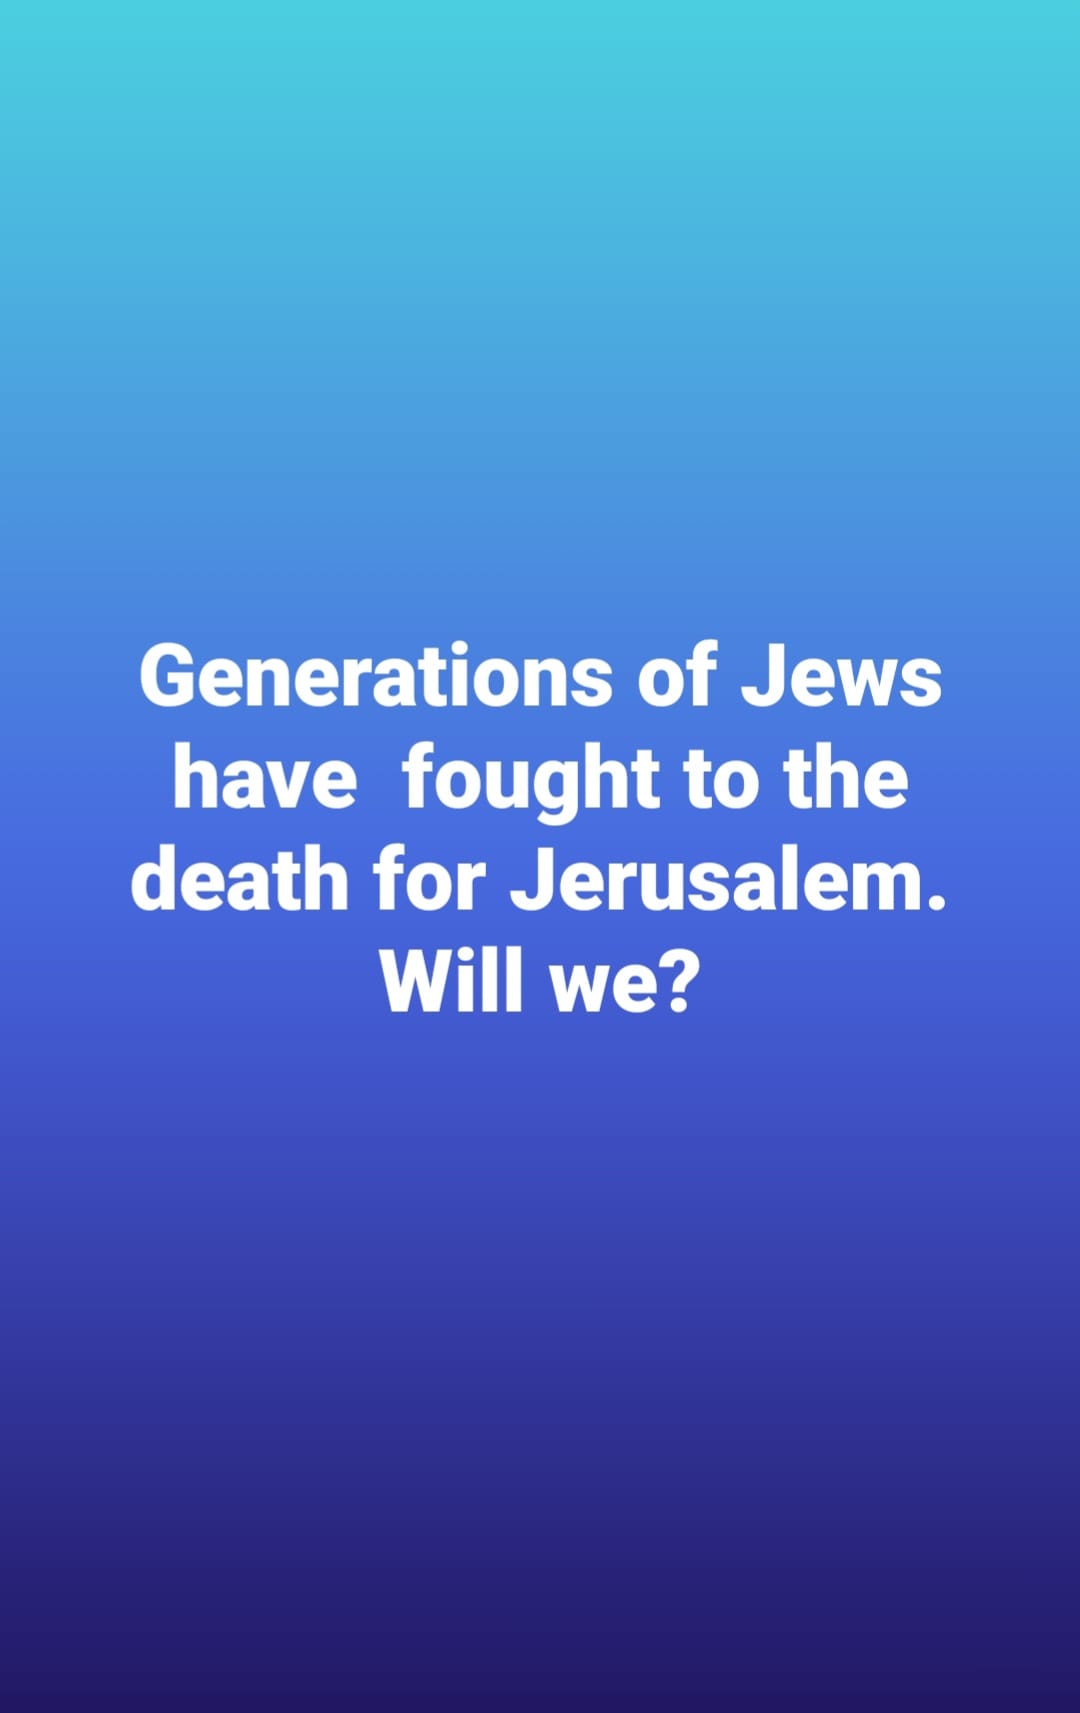 Generations of Jews have fought to the death for Jerusalem. Will we?